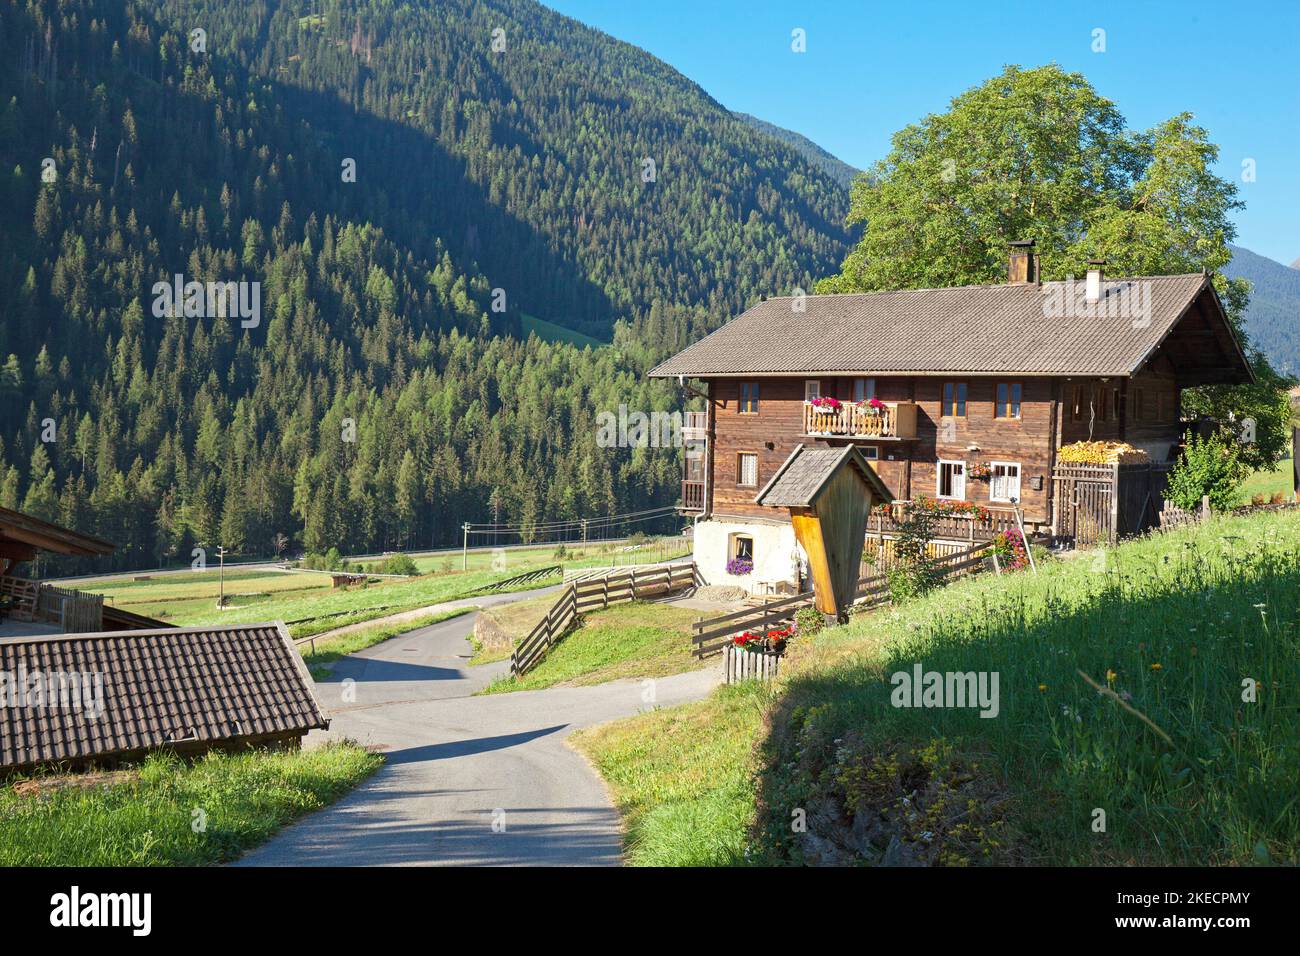 Mountain farmhouse surrounded by meadows and forest in the South Tyrolean Ulten Valley Stock Photo